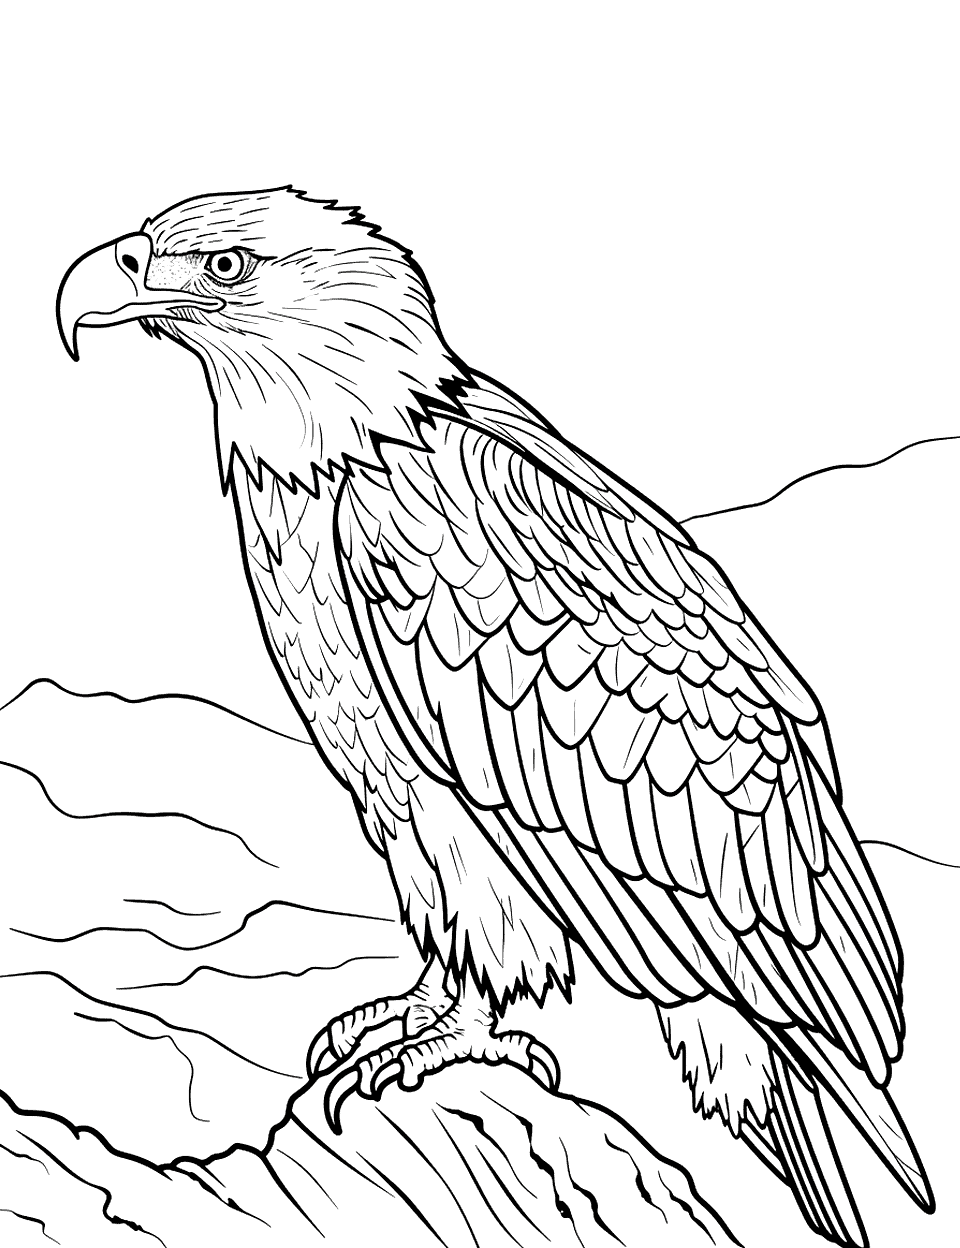 Eagle Watching Over Its Territory Coloring Page - From the top of a cliff, an eagle surveys the land below with a keen gaze, with minimal background details.